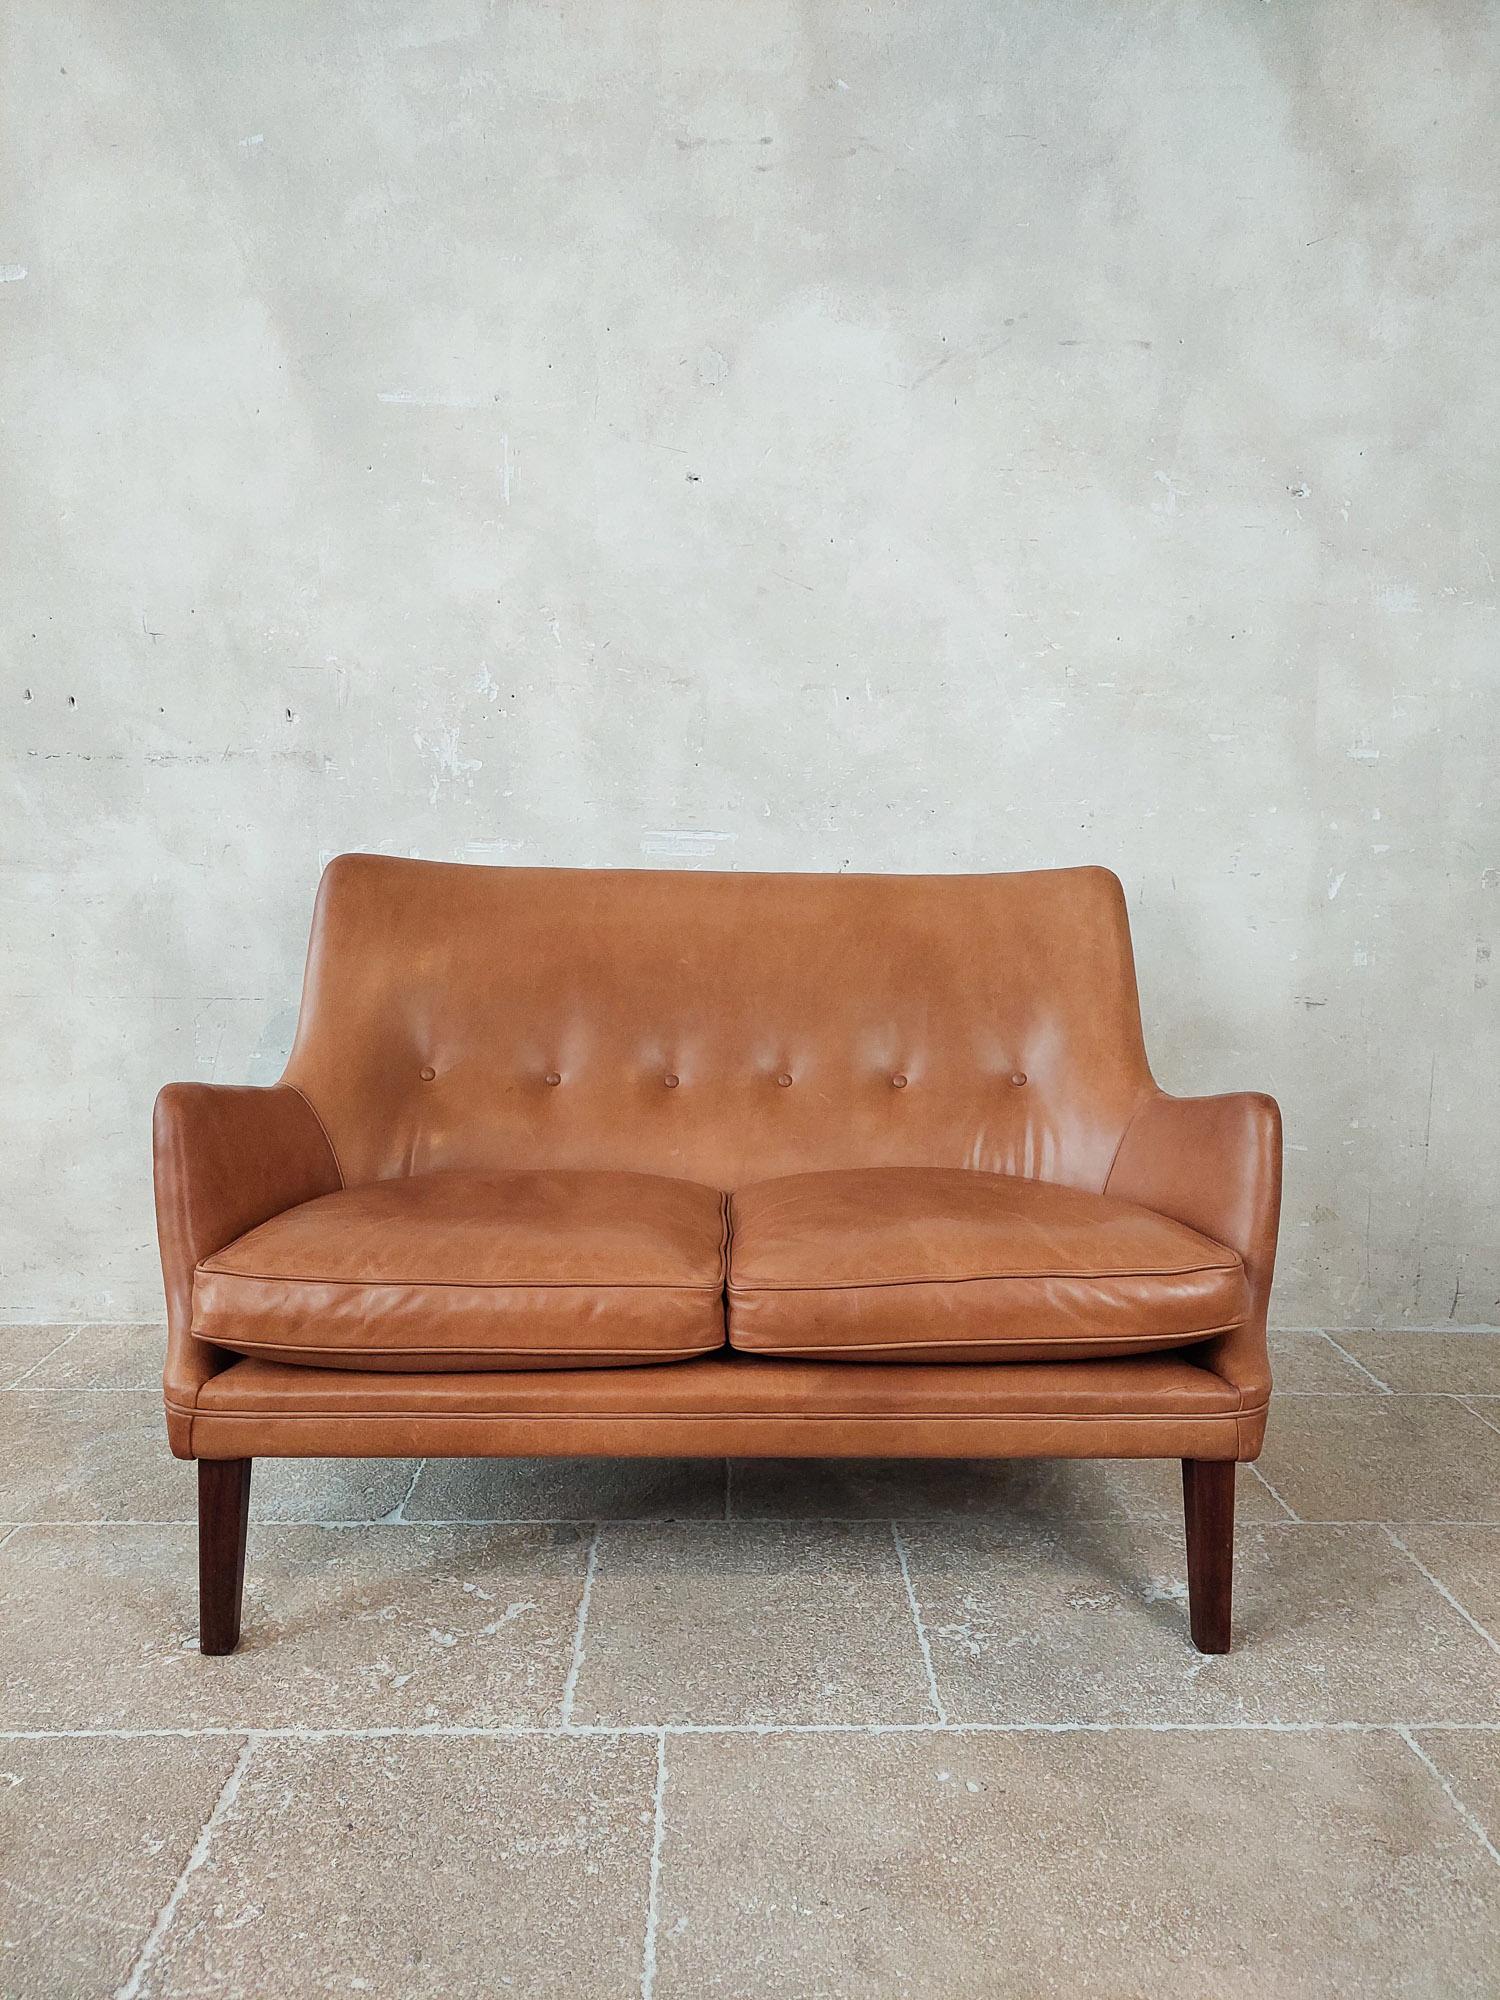 Original two-seat sofa designed by the Danish designer Arne Vodder and manufactured by Ivan Schlechter in 1953. This vintage Scandinavian designer sofa comes in original brown-cognac leather and dark wooden legs and is in very good condition.

h